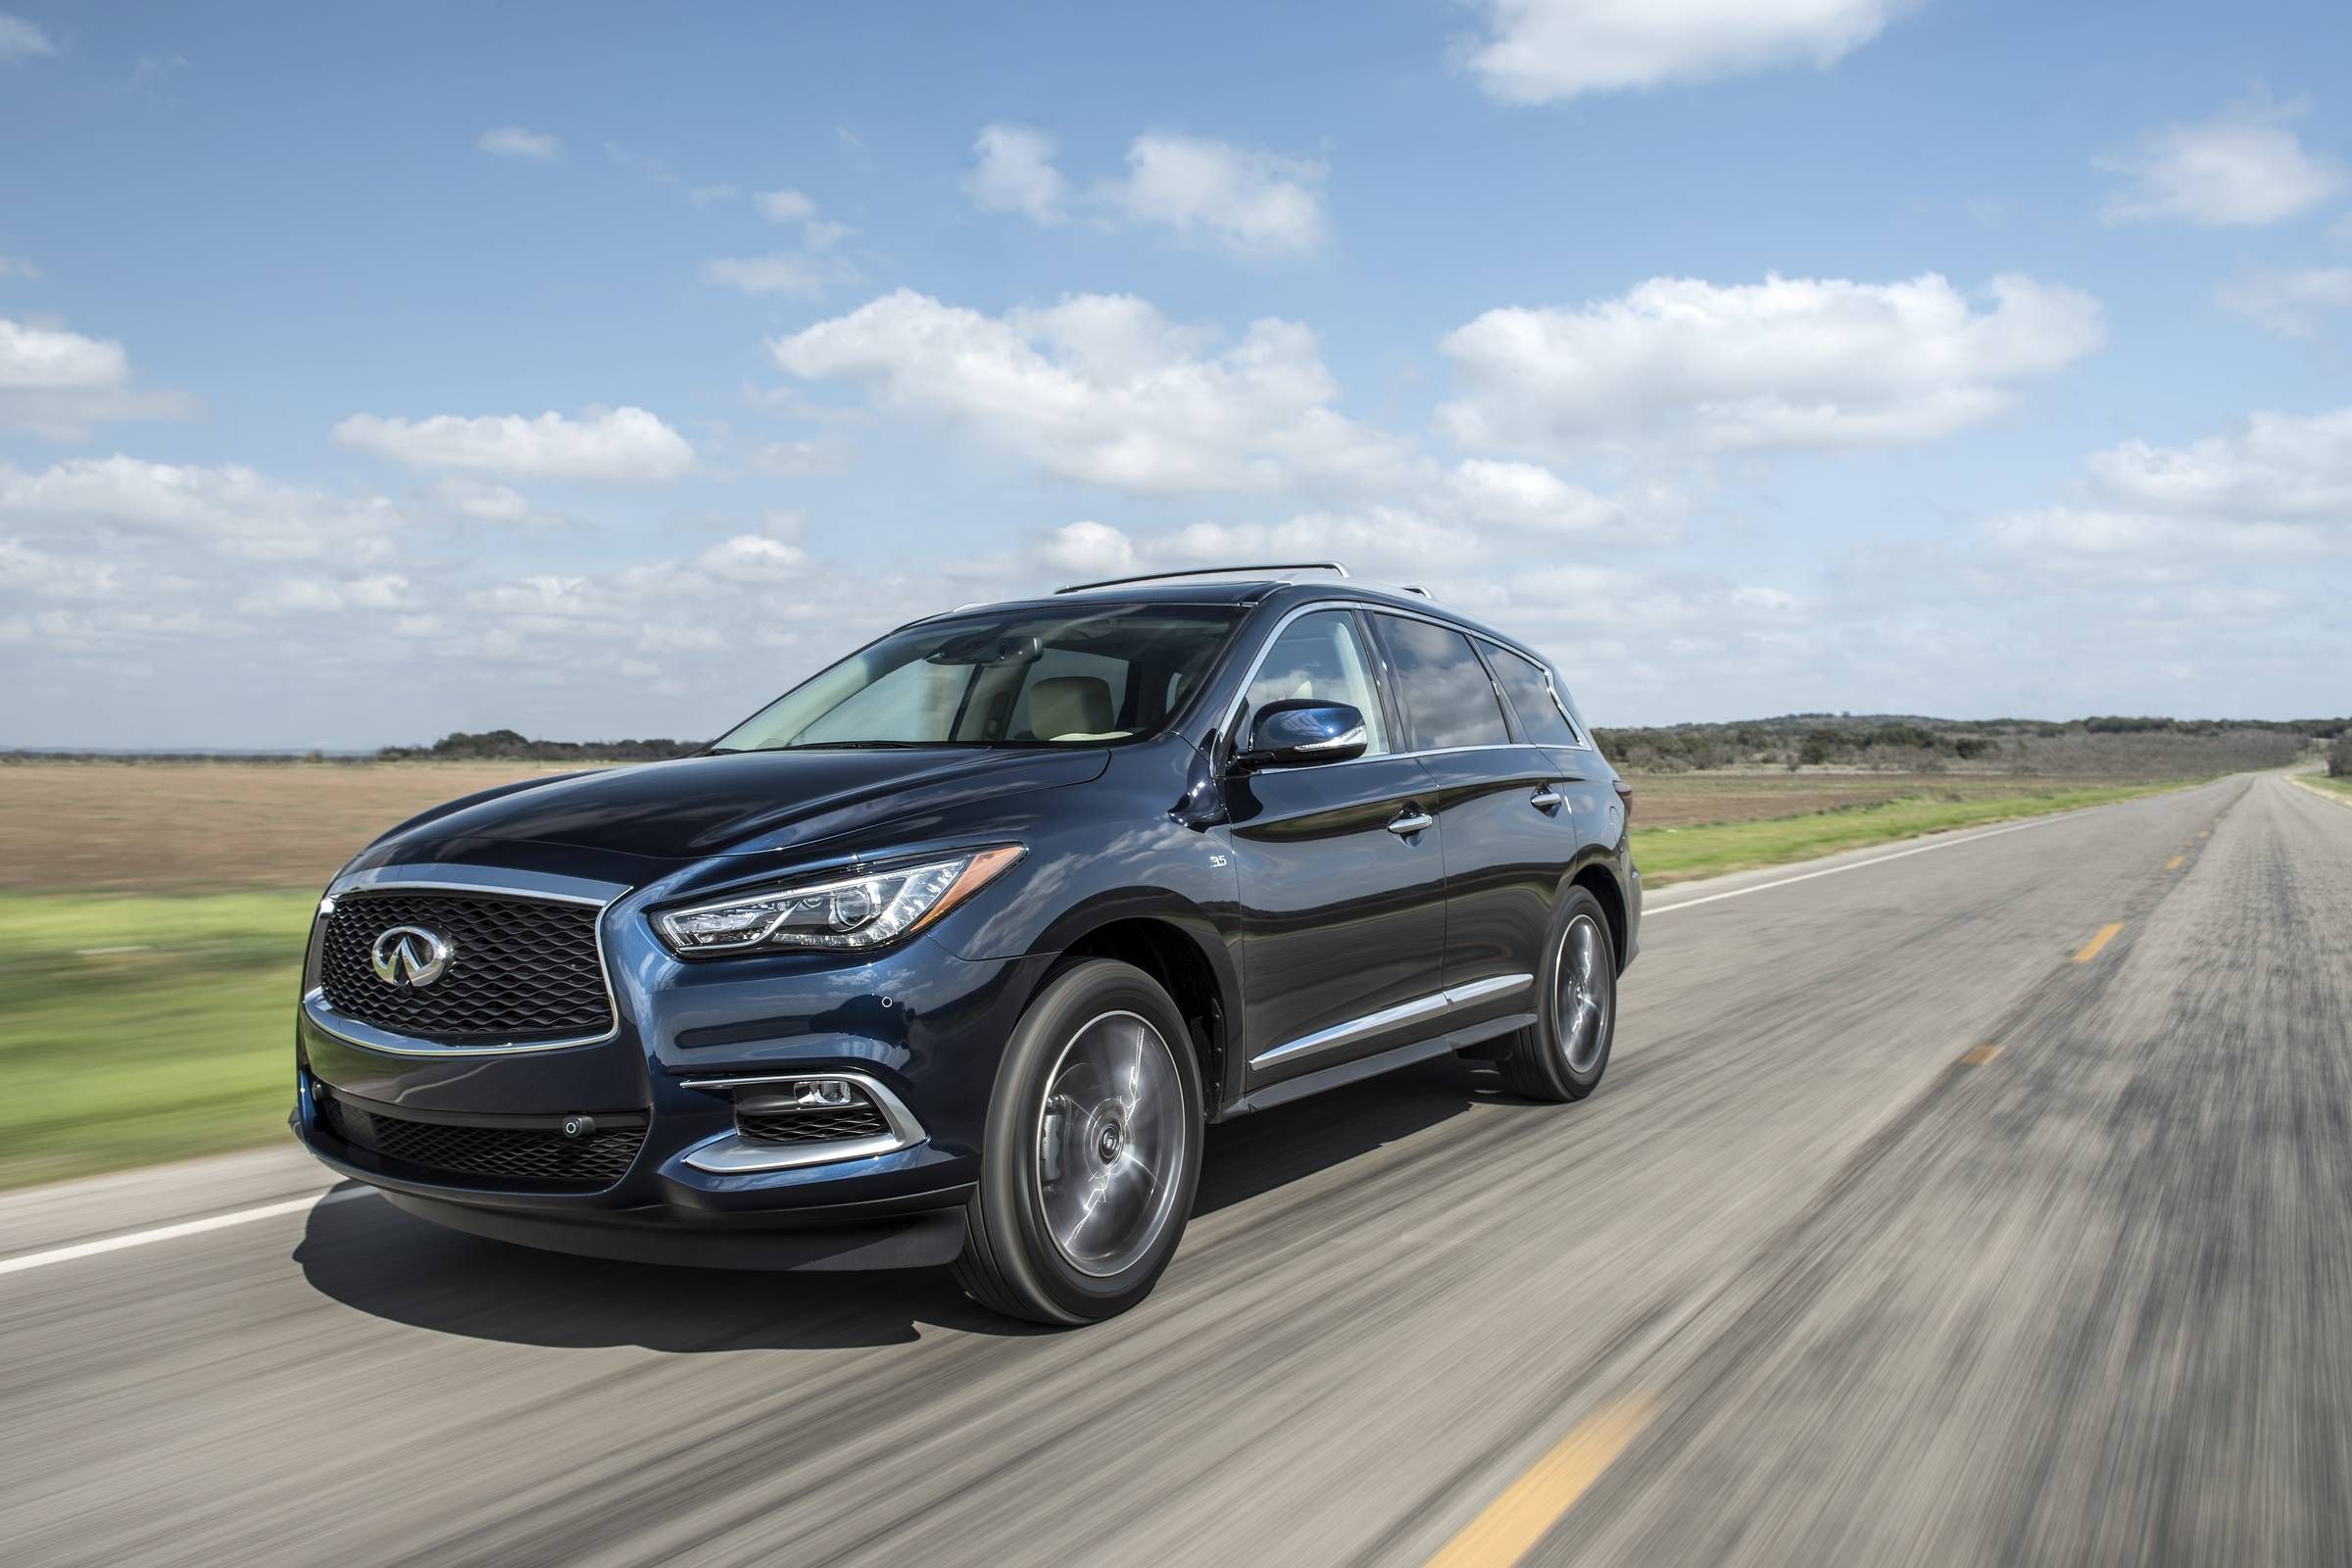 2018 Infiniti QX60 essentials: Right-sized, comfortable and soft